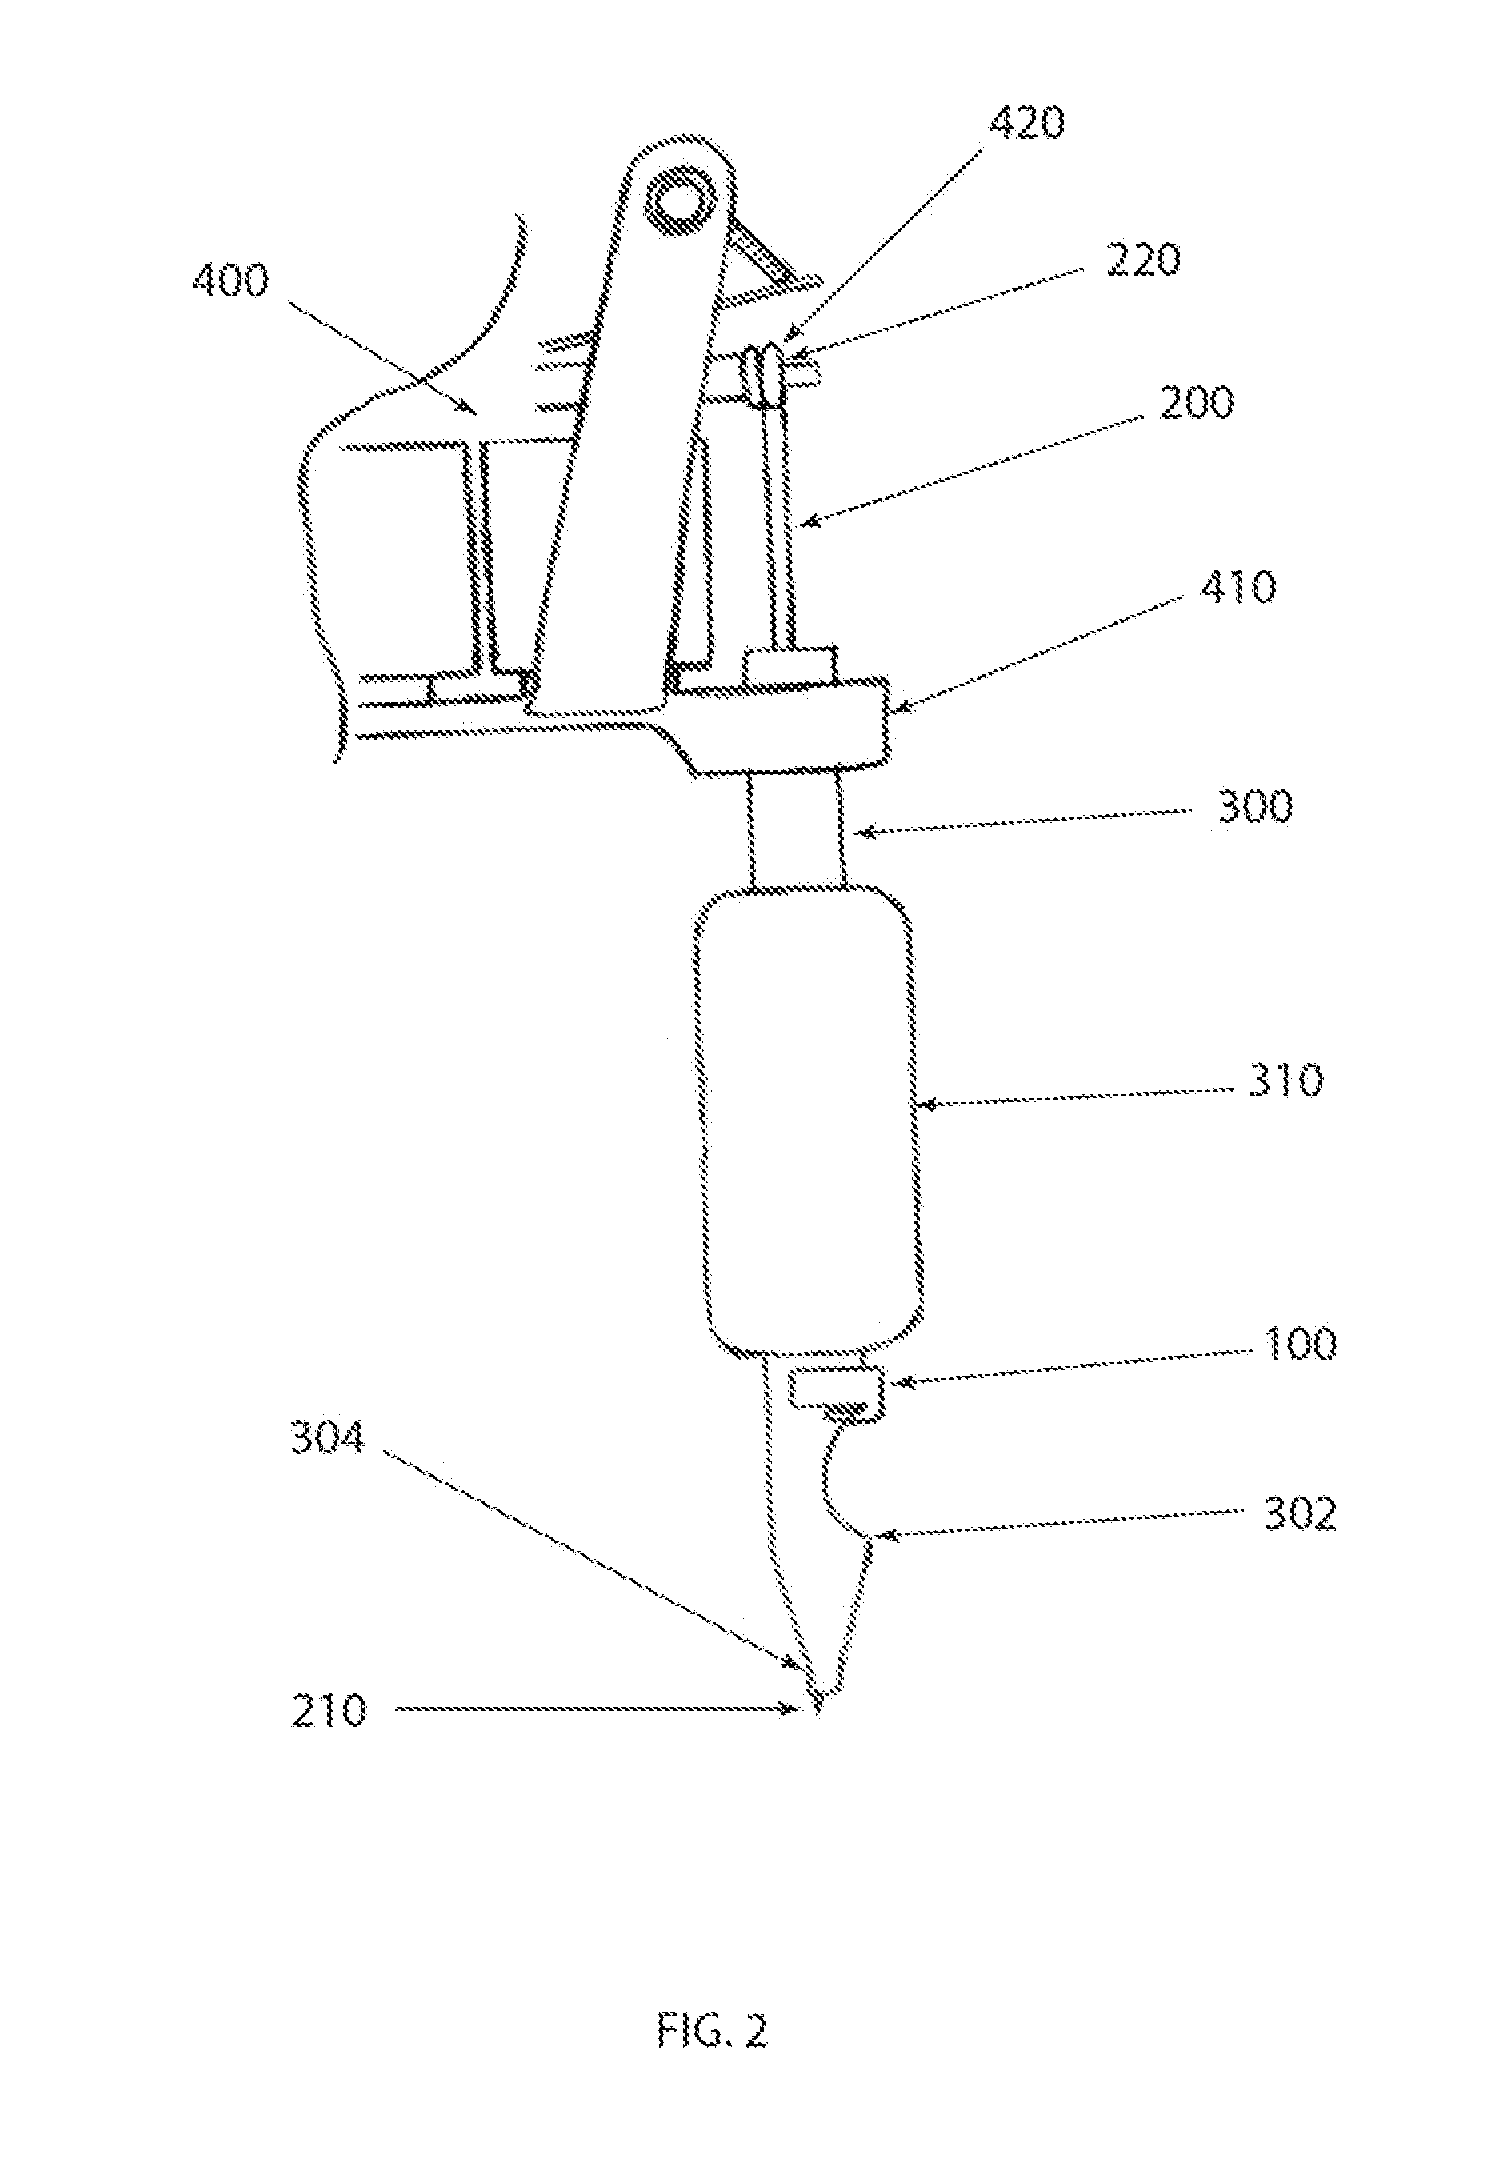 Tattoo needle stabilization device and method of use